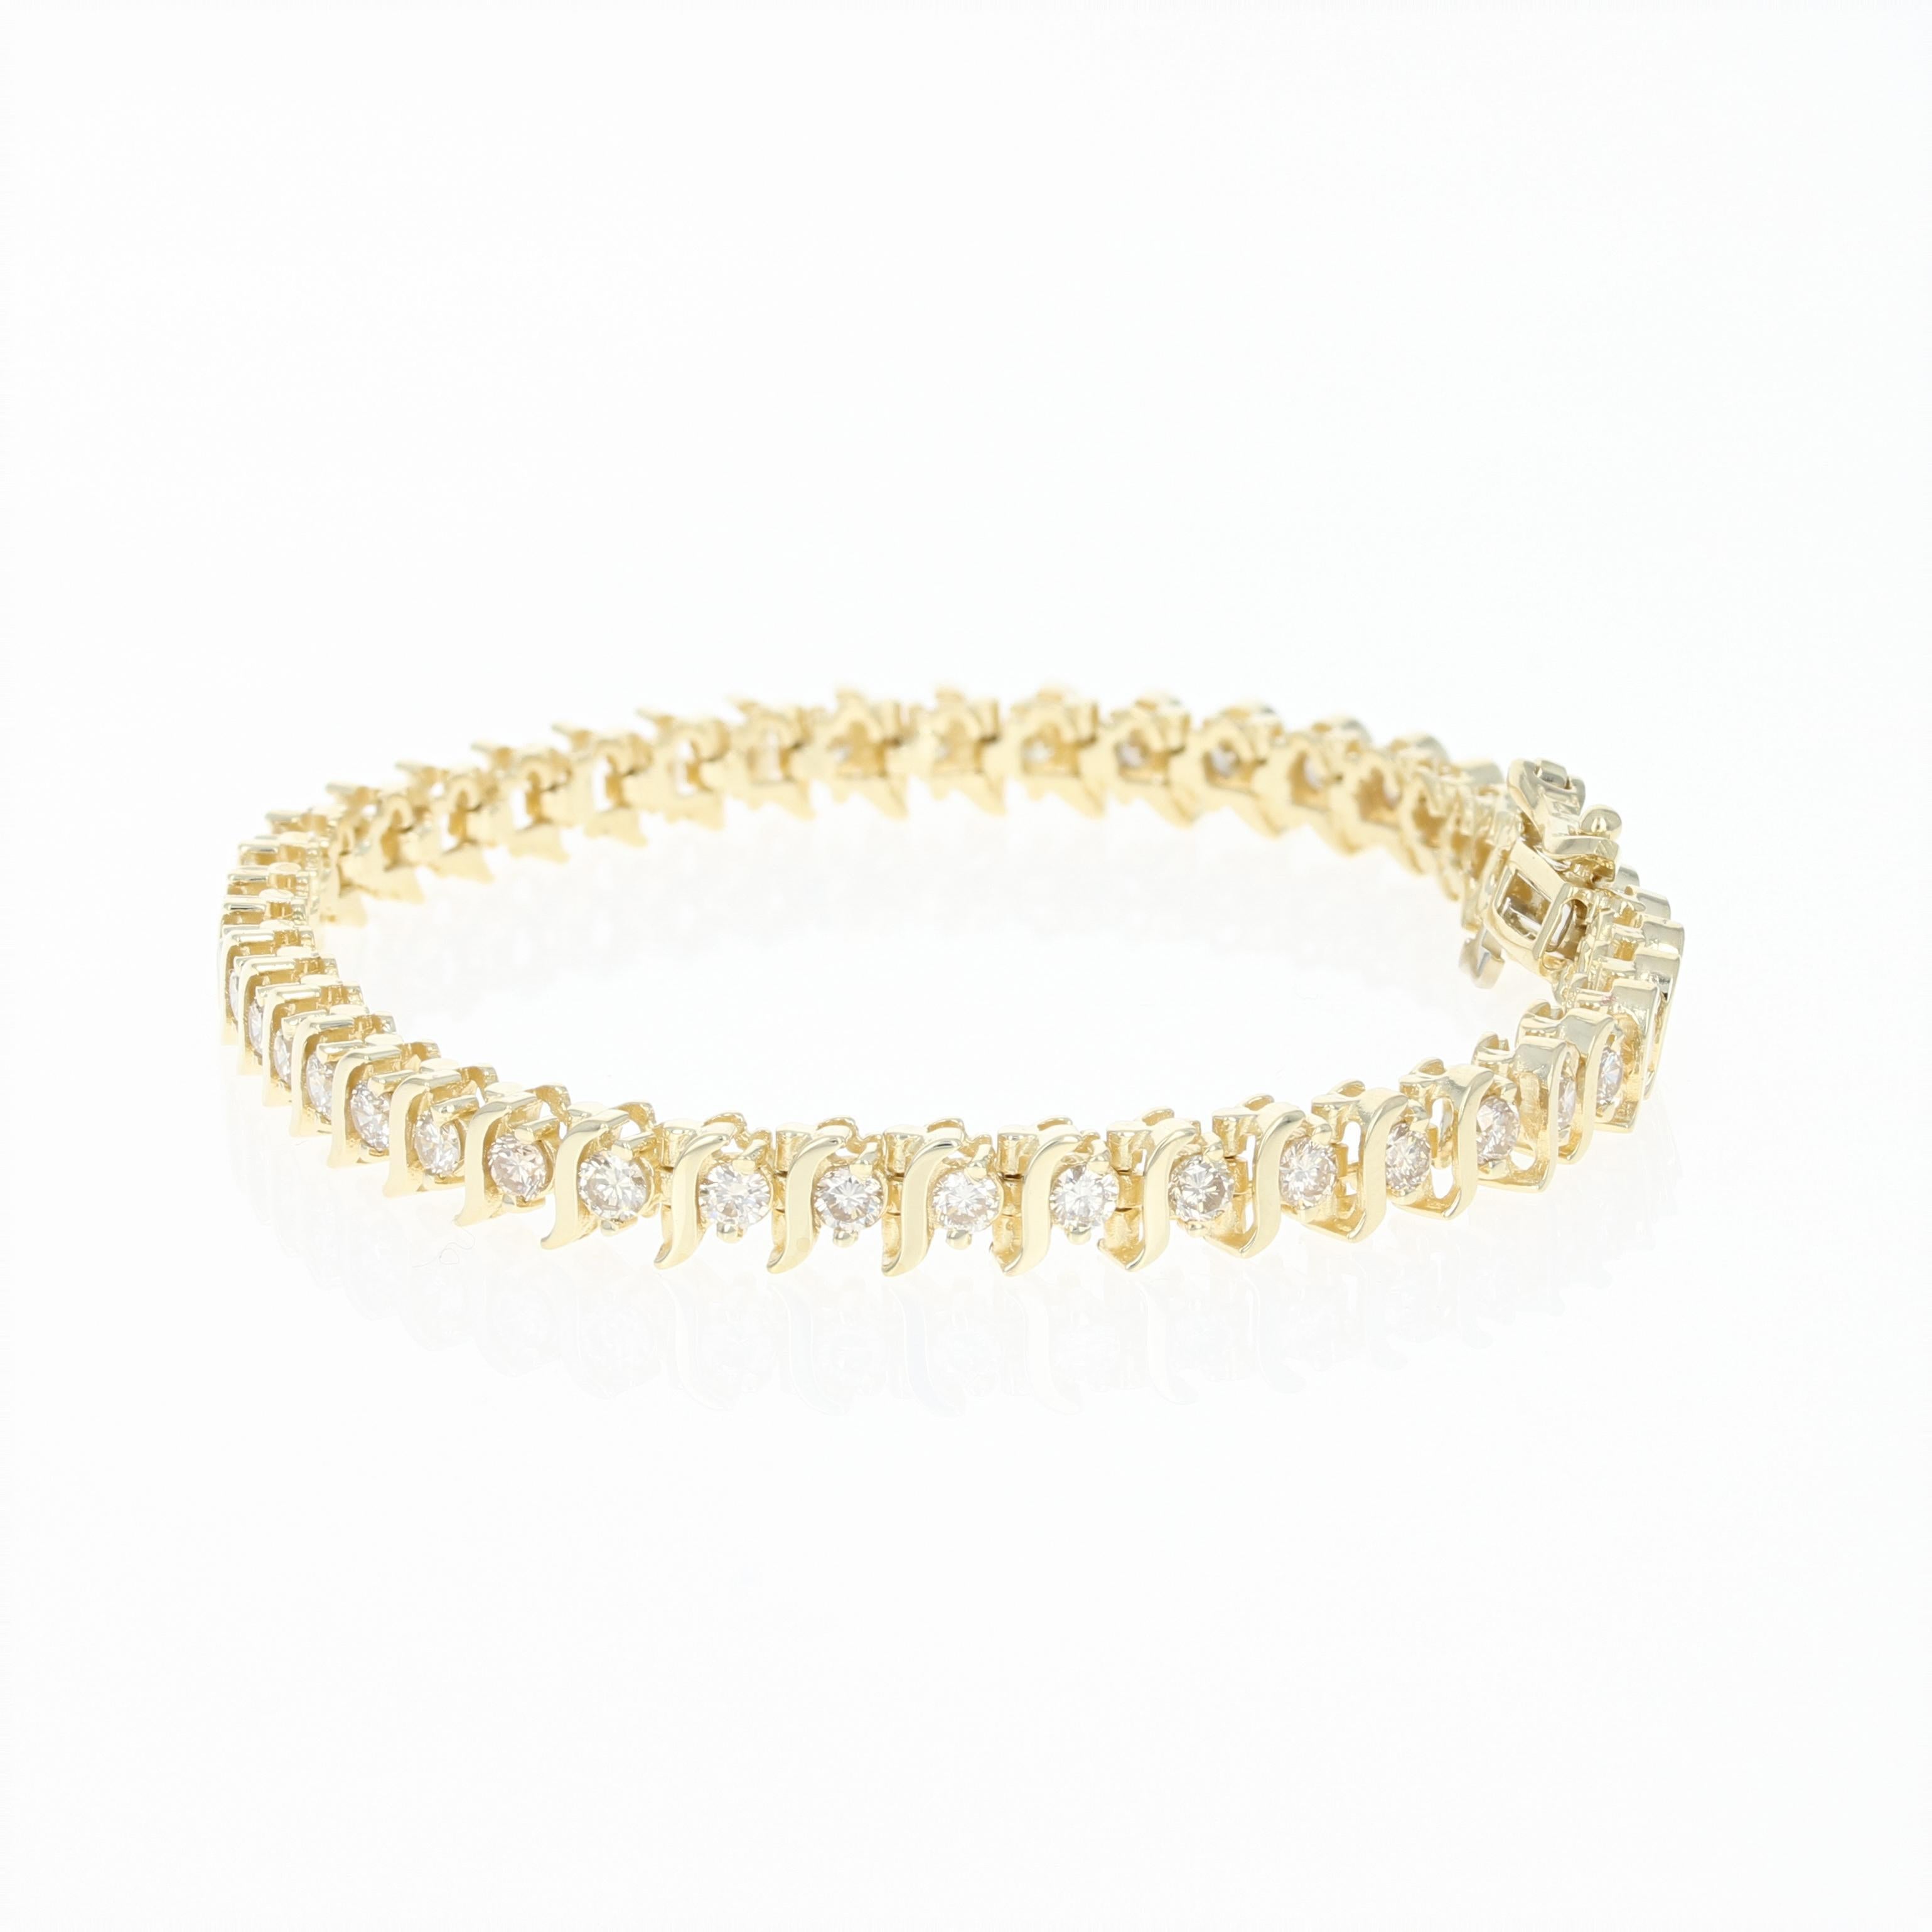 Get ready to light up the night wearing this radiant piece! Fashioned in a classic tennis style, this sophisticated 14k yellow gold bracelet showcases a sparkling array of white diamonds held in ported mounts to illuminate their inner brilliance